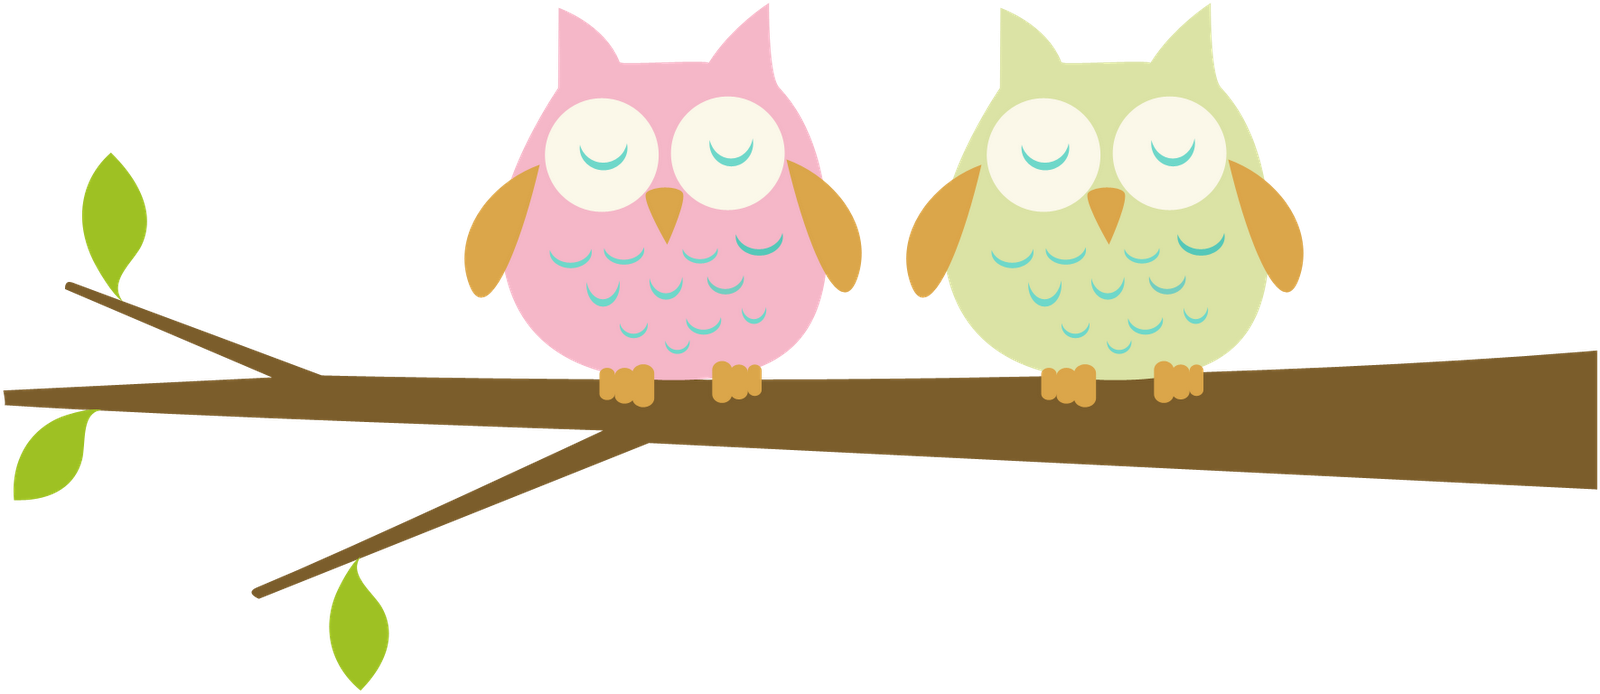 Royalty free mother owl and babies clipart to download